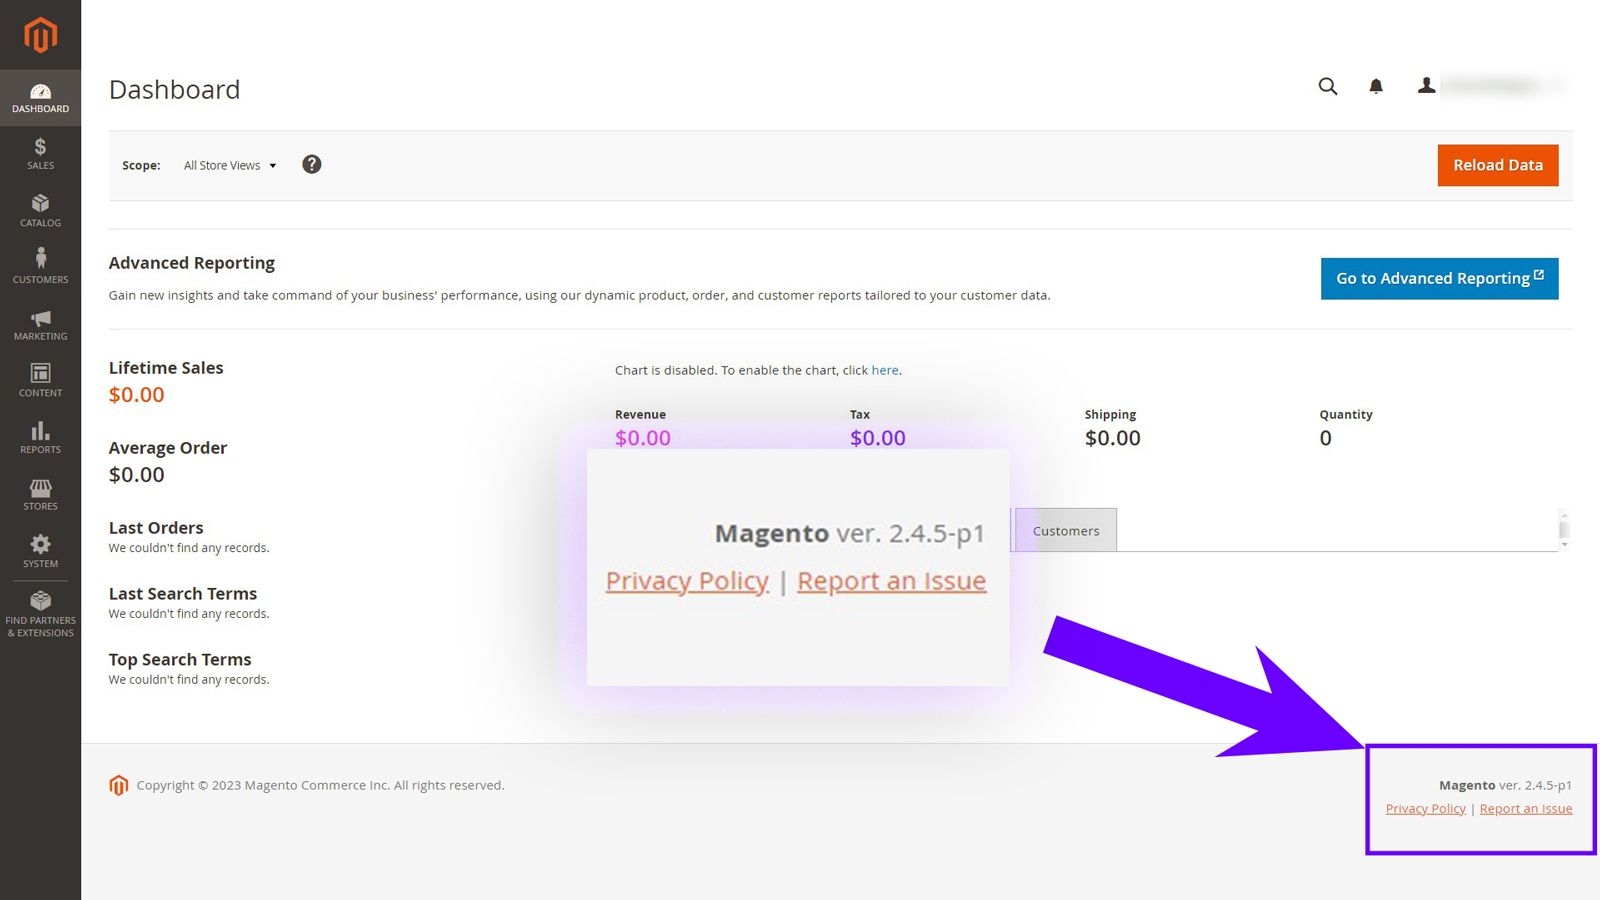 Screenshot of the Magento admin with a purple arrow pointing to the Magento version located at the bottom of the footer.